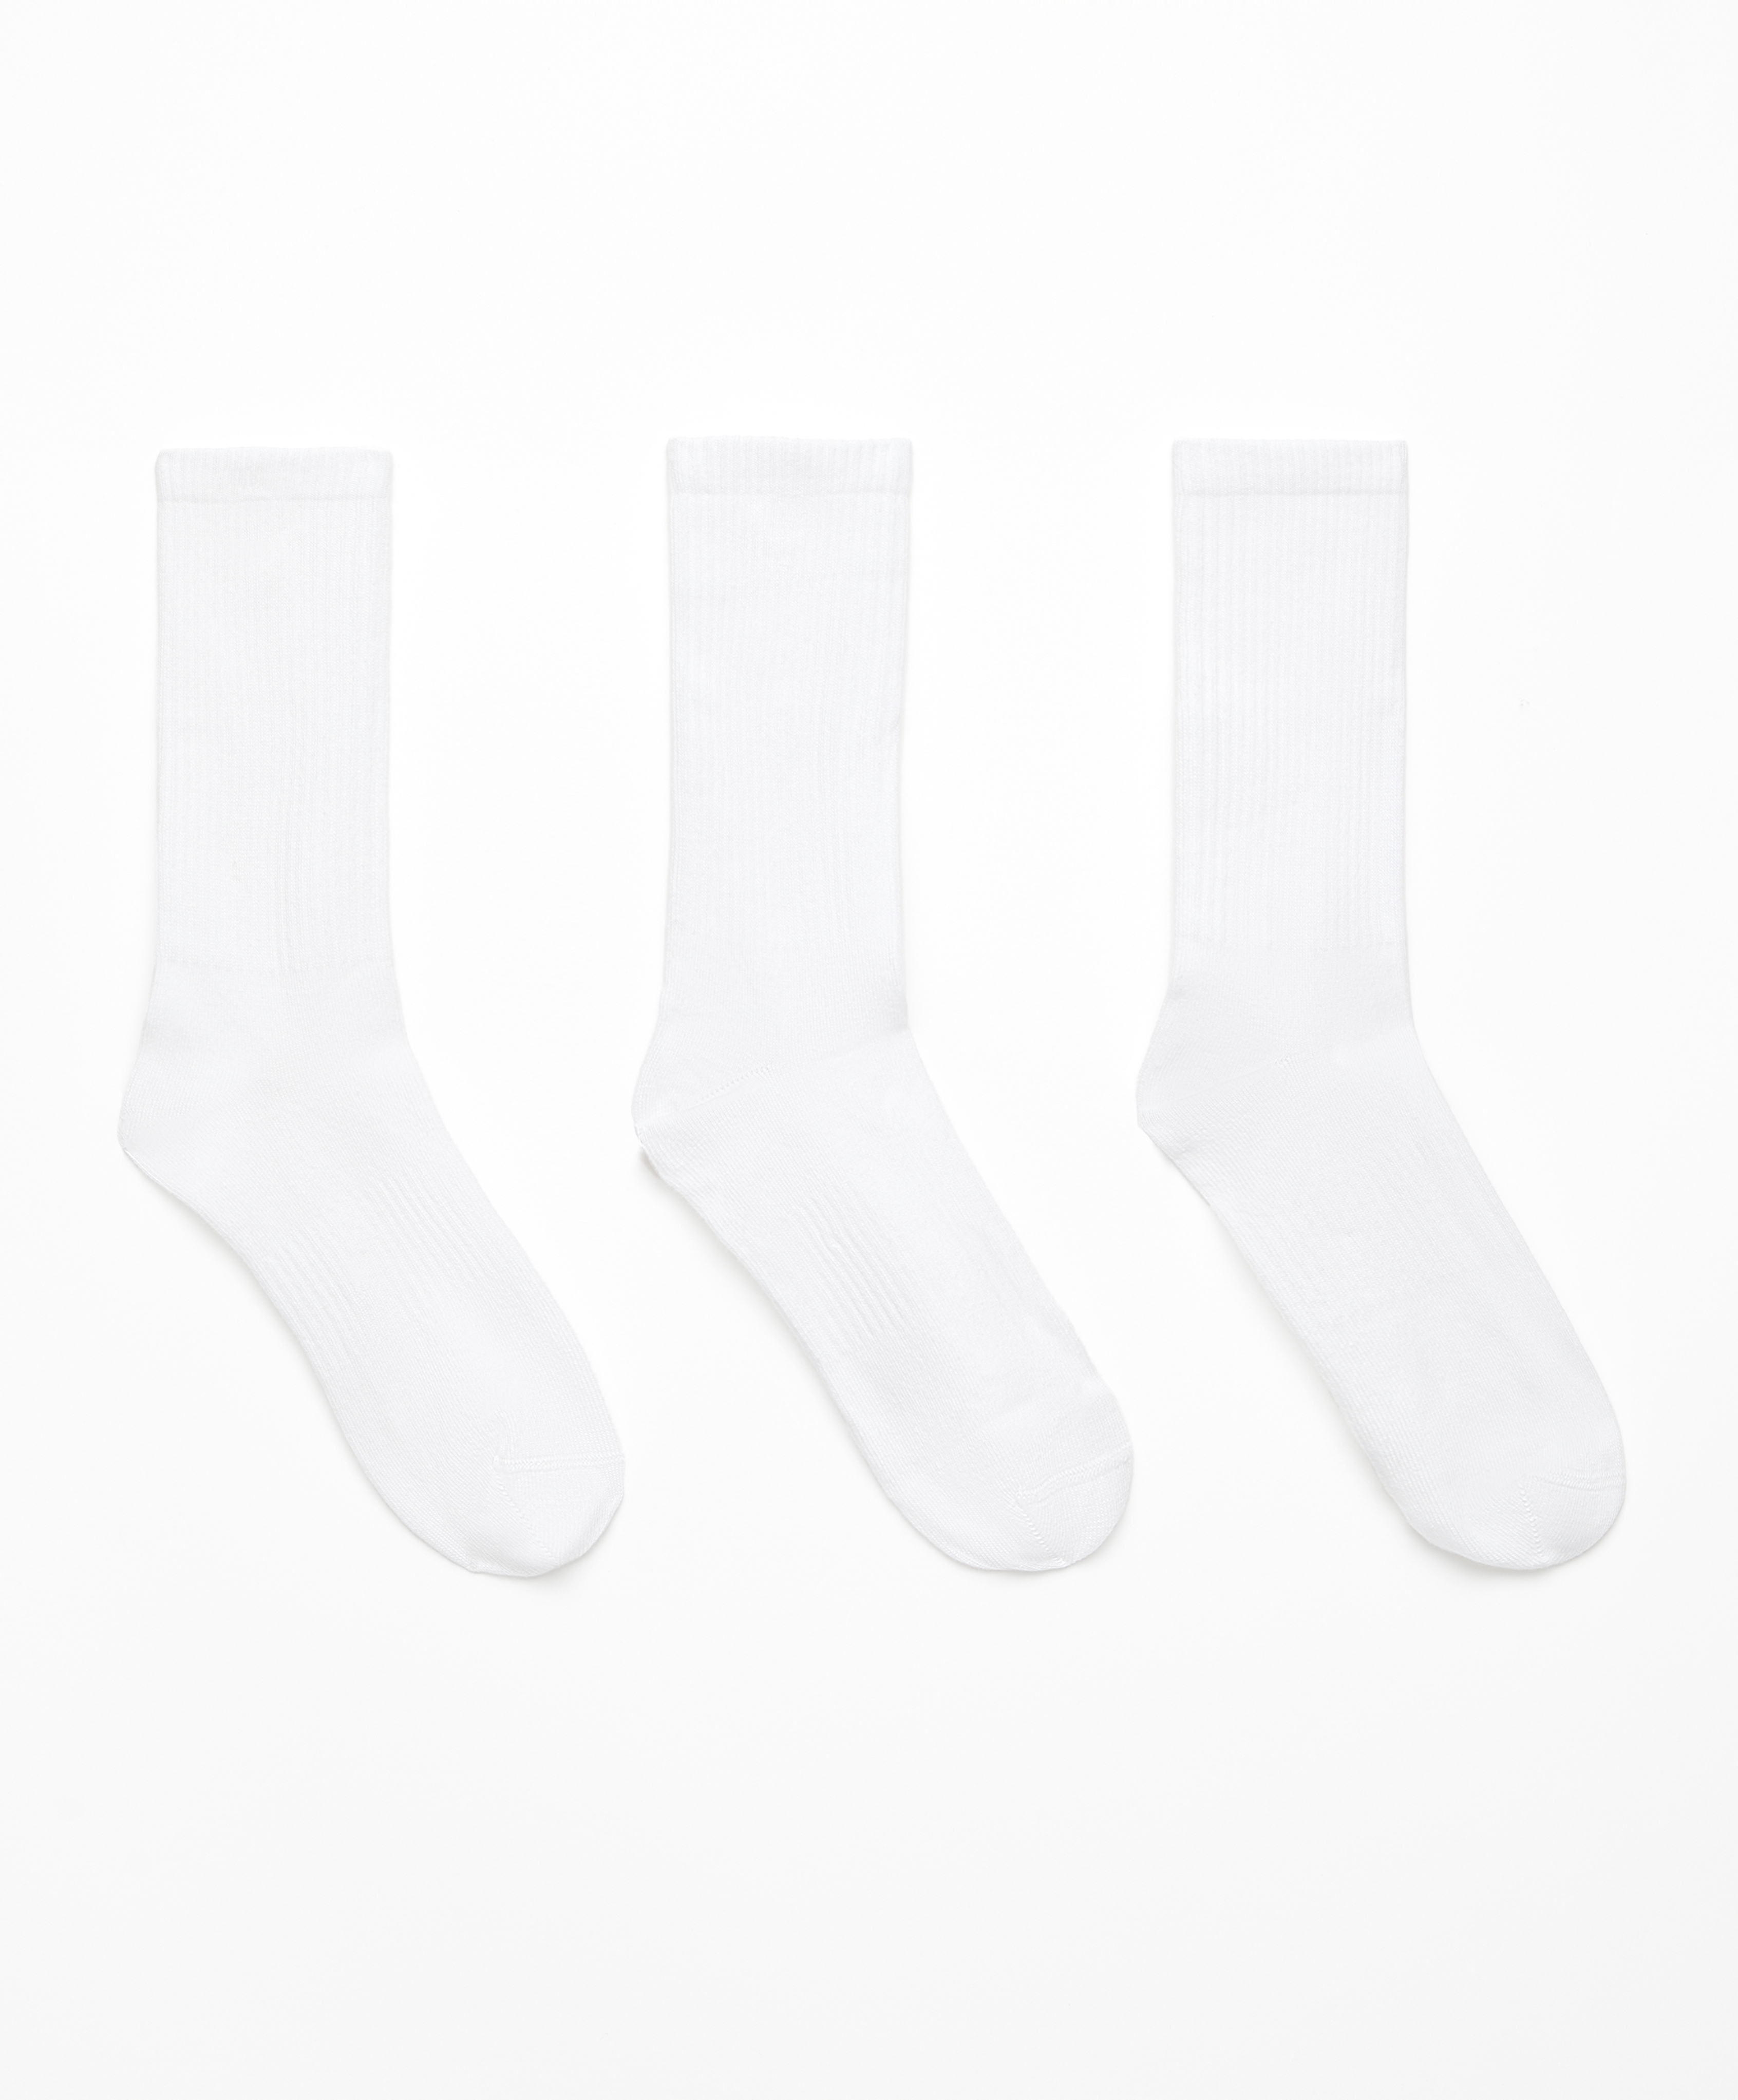 3 pairs of cotton blend classic sports socks